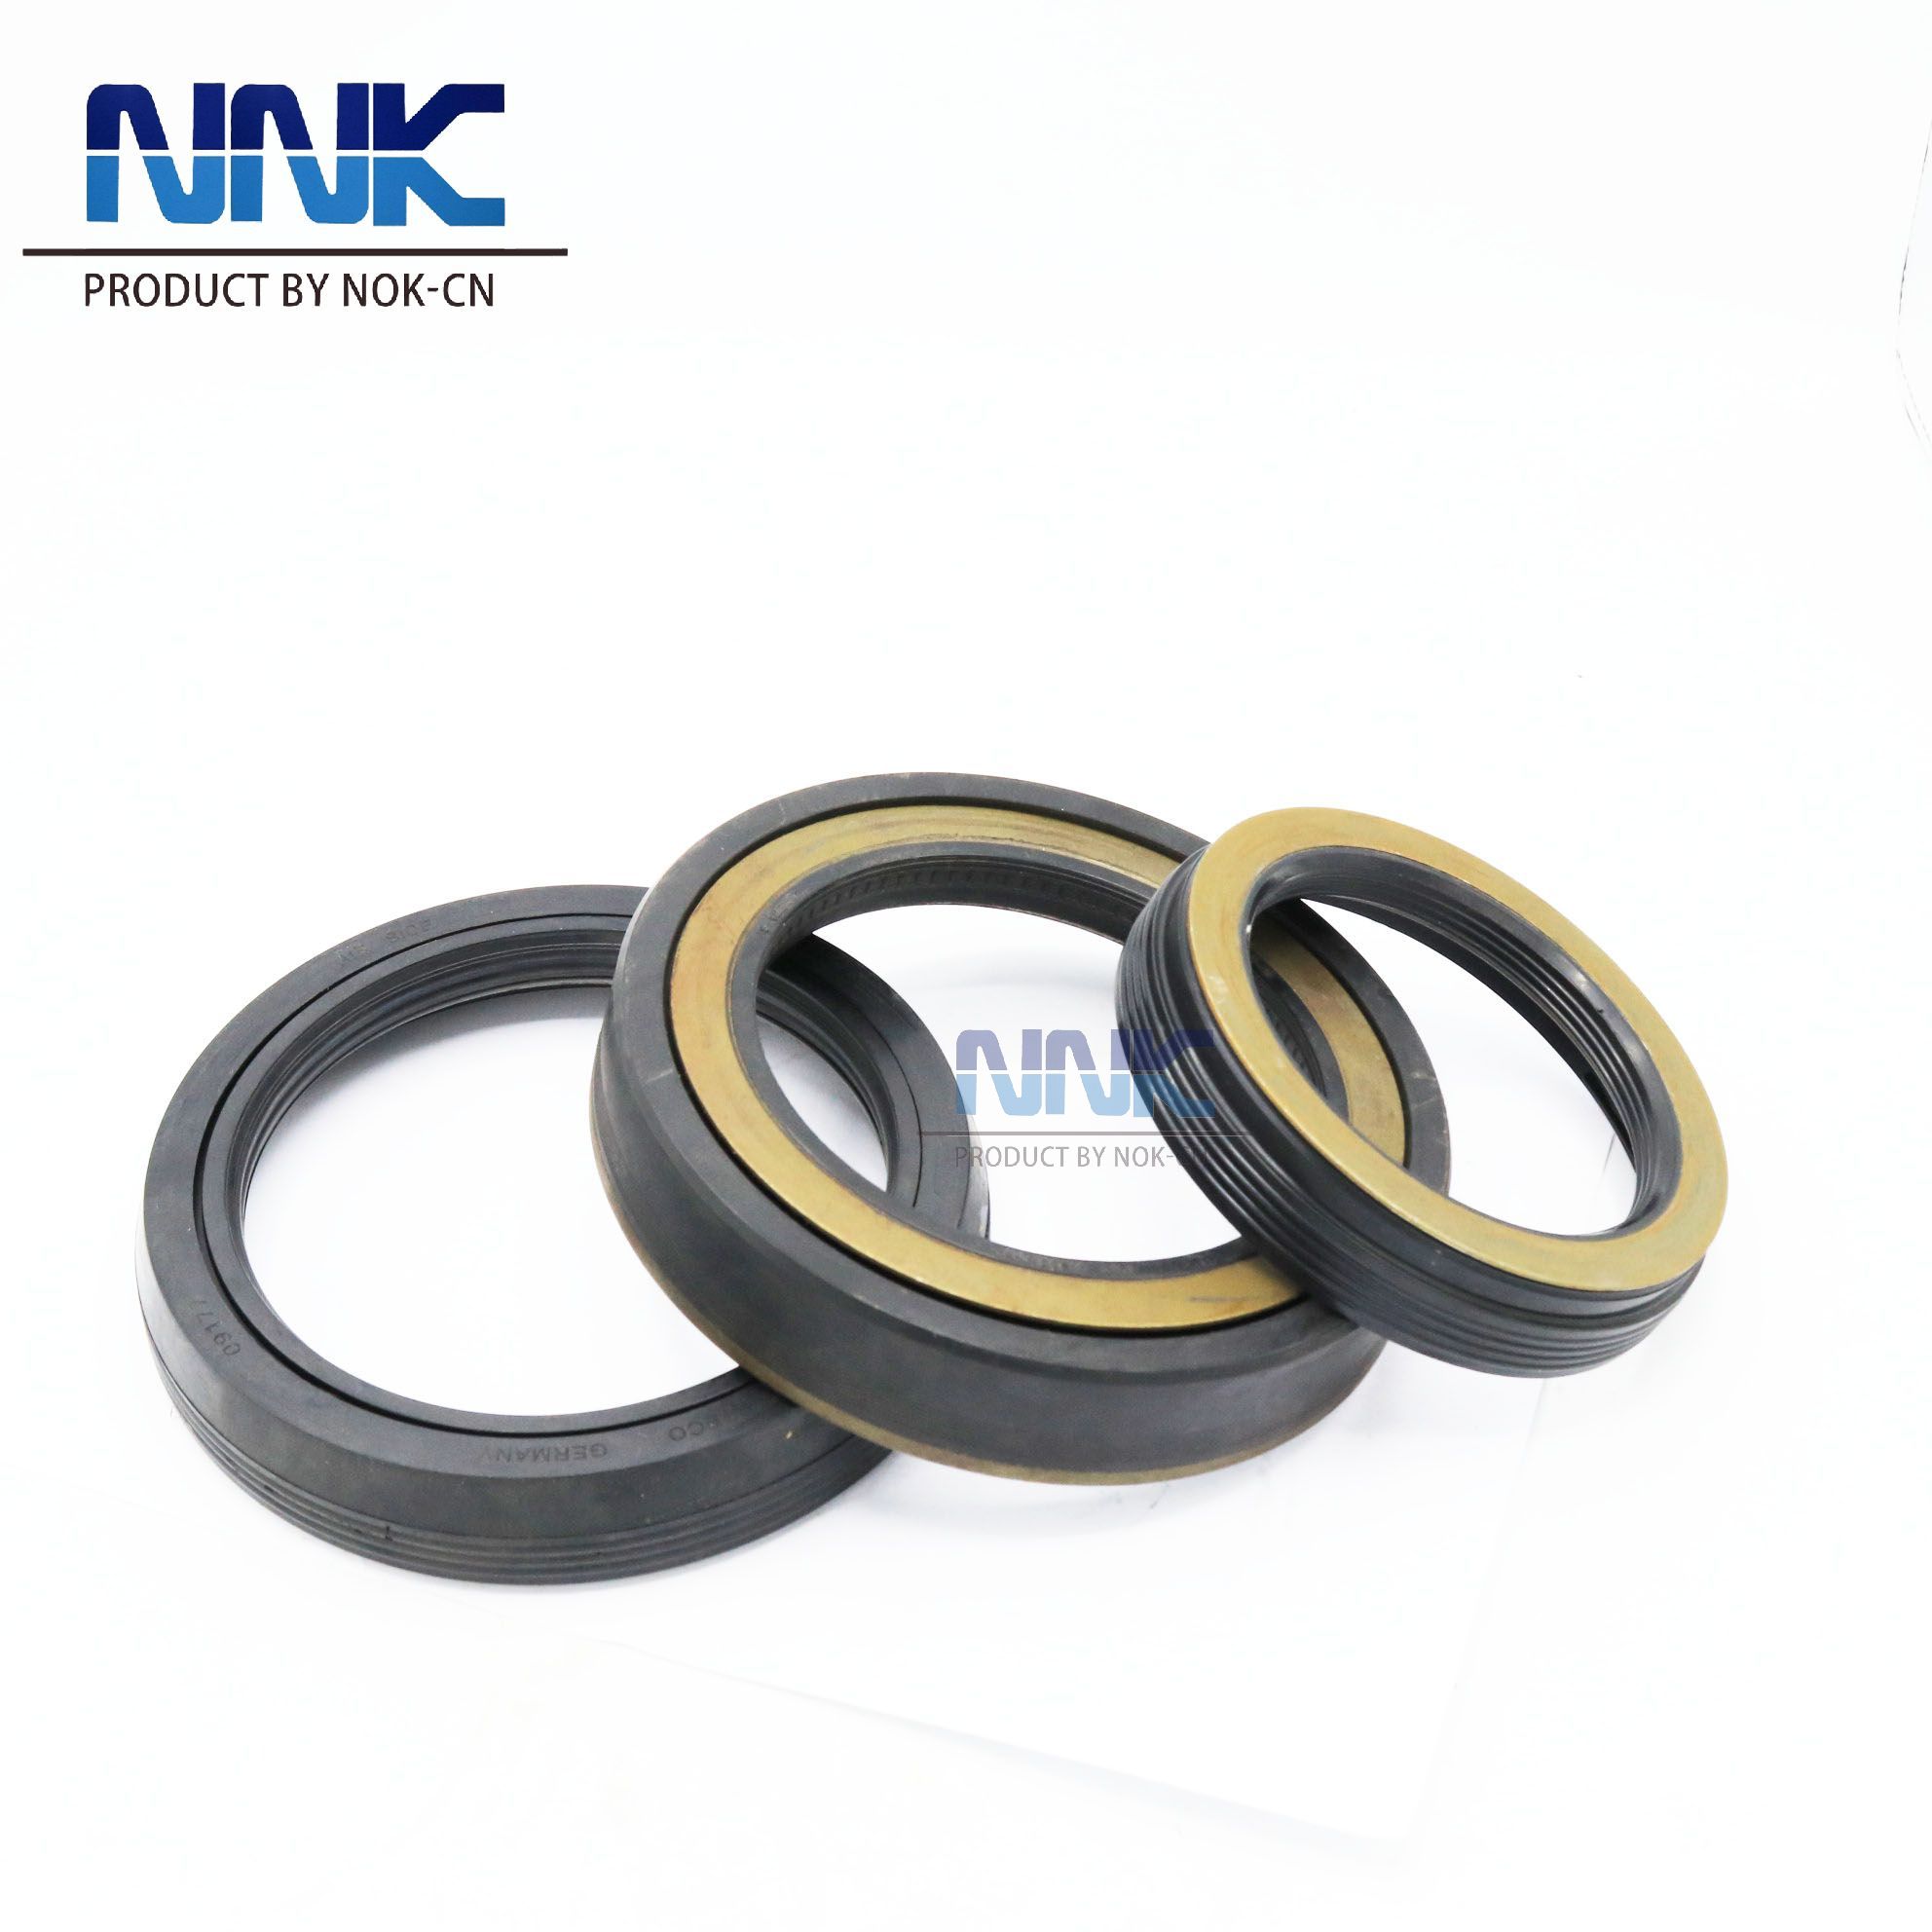 What is the purpose of hub oil seal?